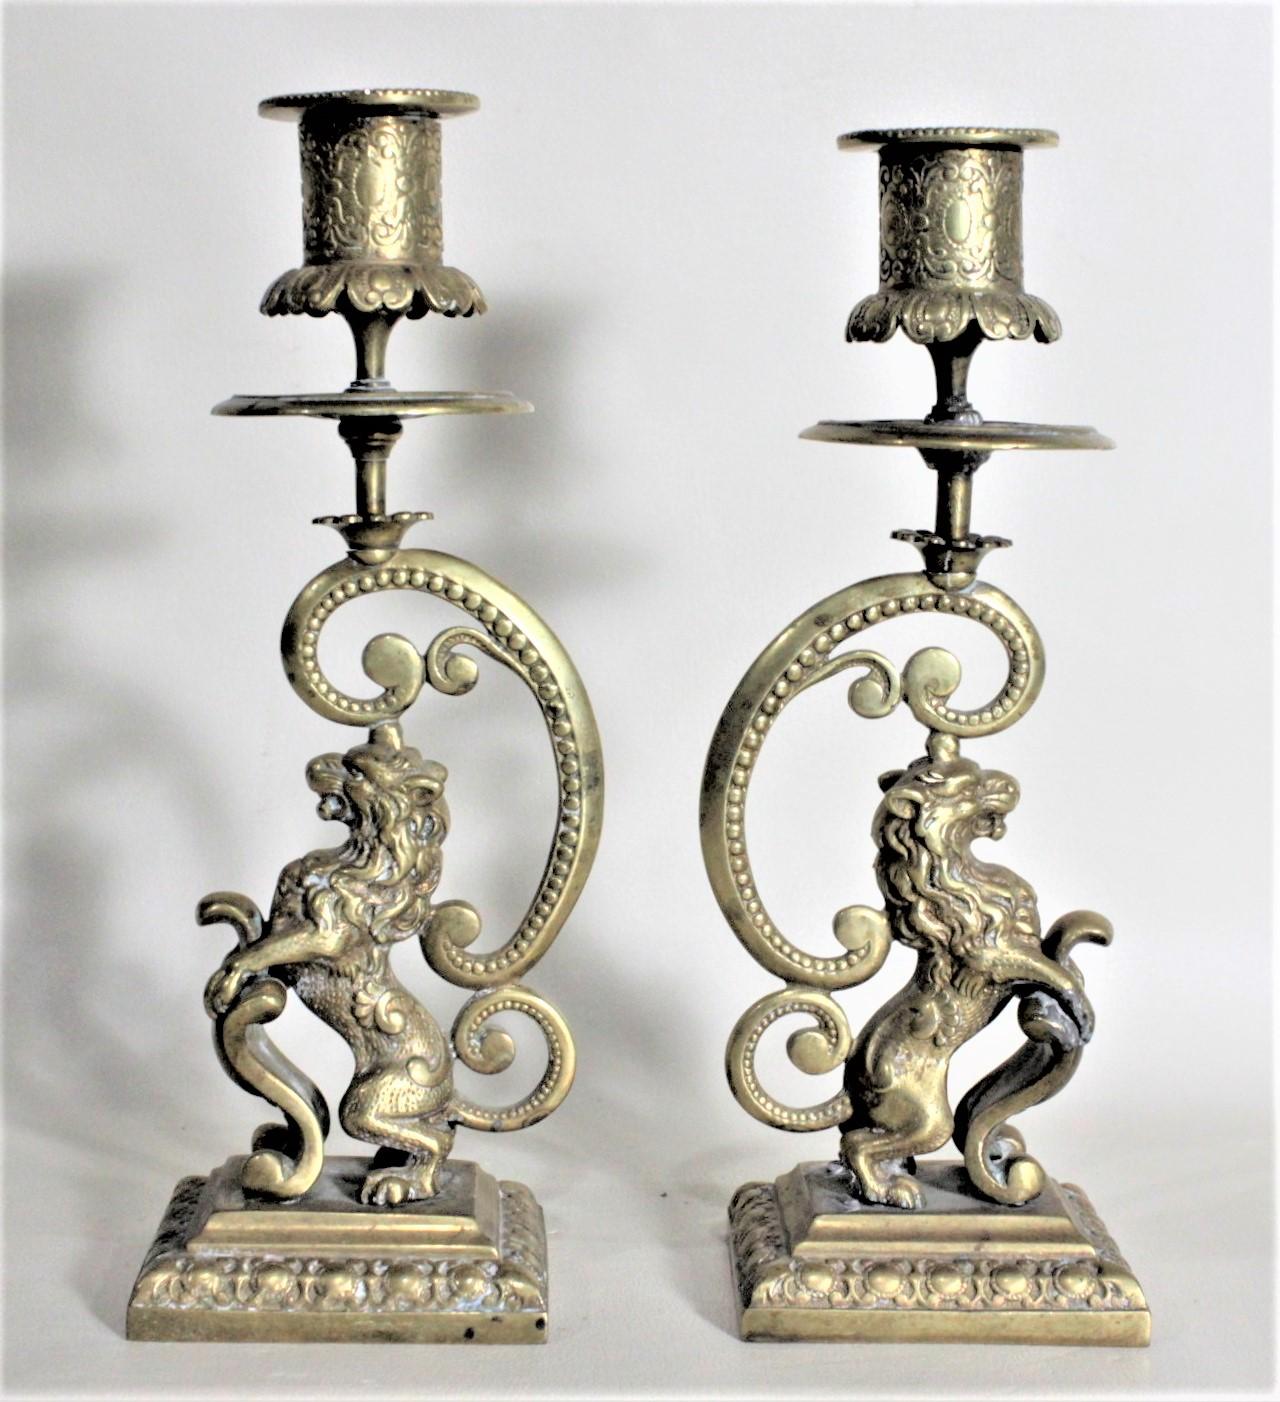 This pair of solid brass candlesticks are unsigned, but believed to have been made in England in circa 1880, in the period Victorian style. The candlesticks are quite detailed in their casting and depict a rearing male lion with one outstretched paw